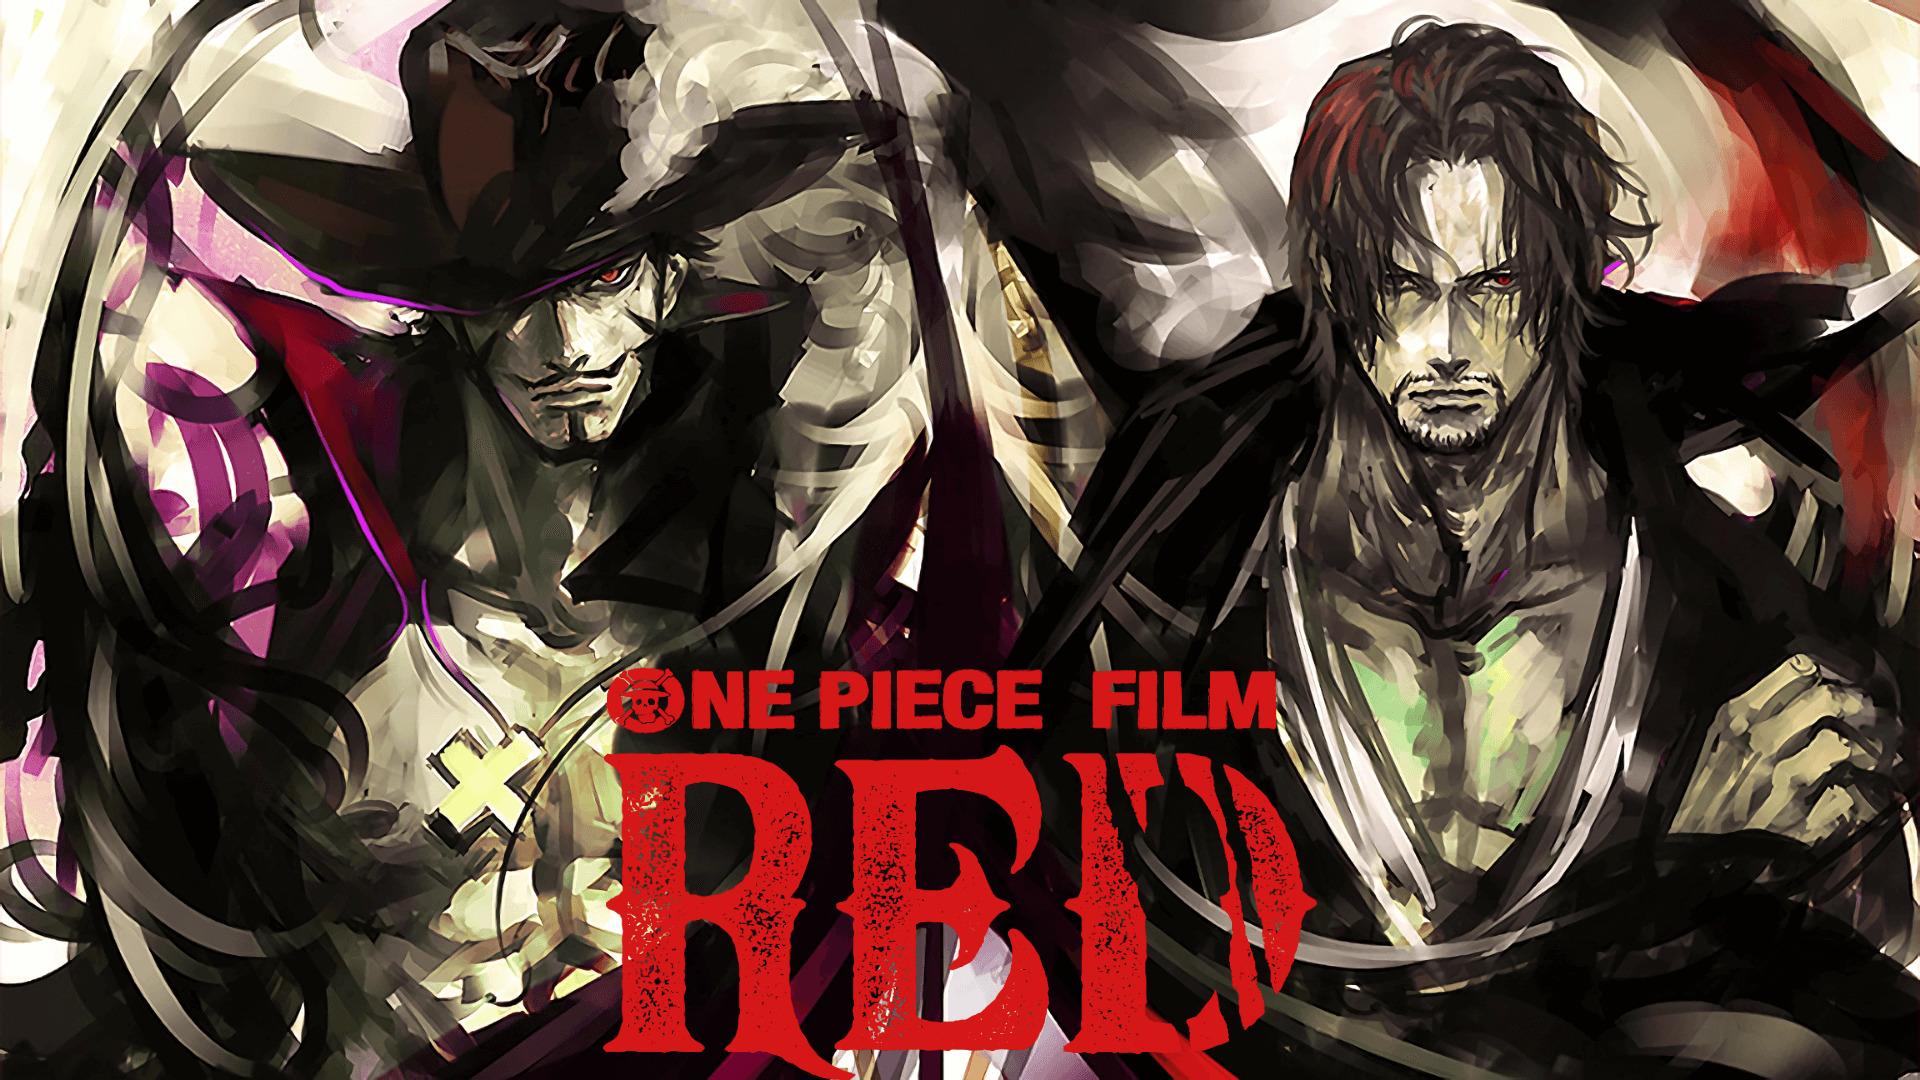 One Piece Red Film Wallpaper Phone